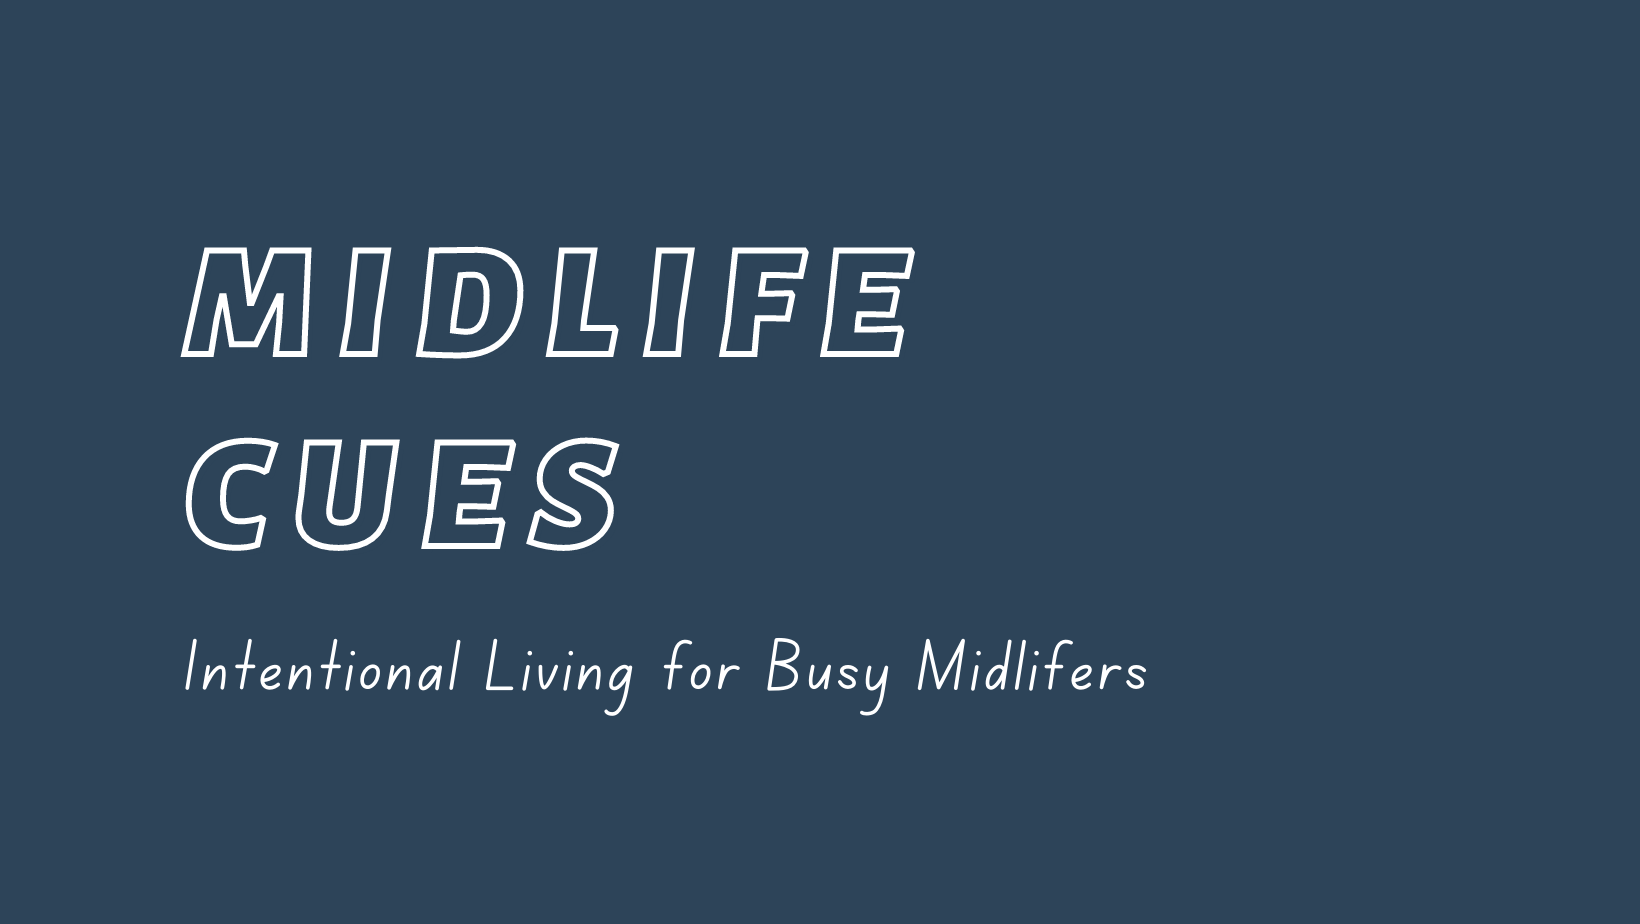 Midlife Cues: Current Issue